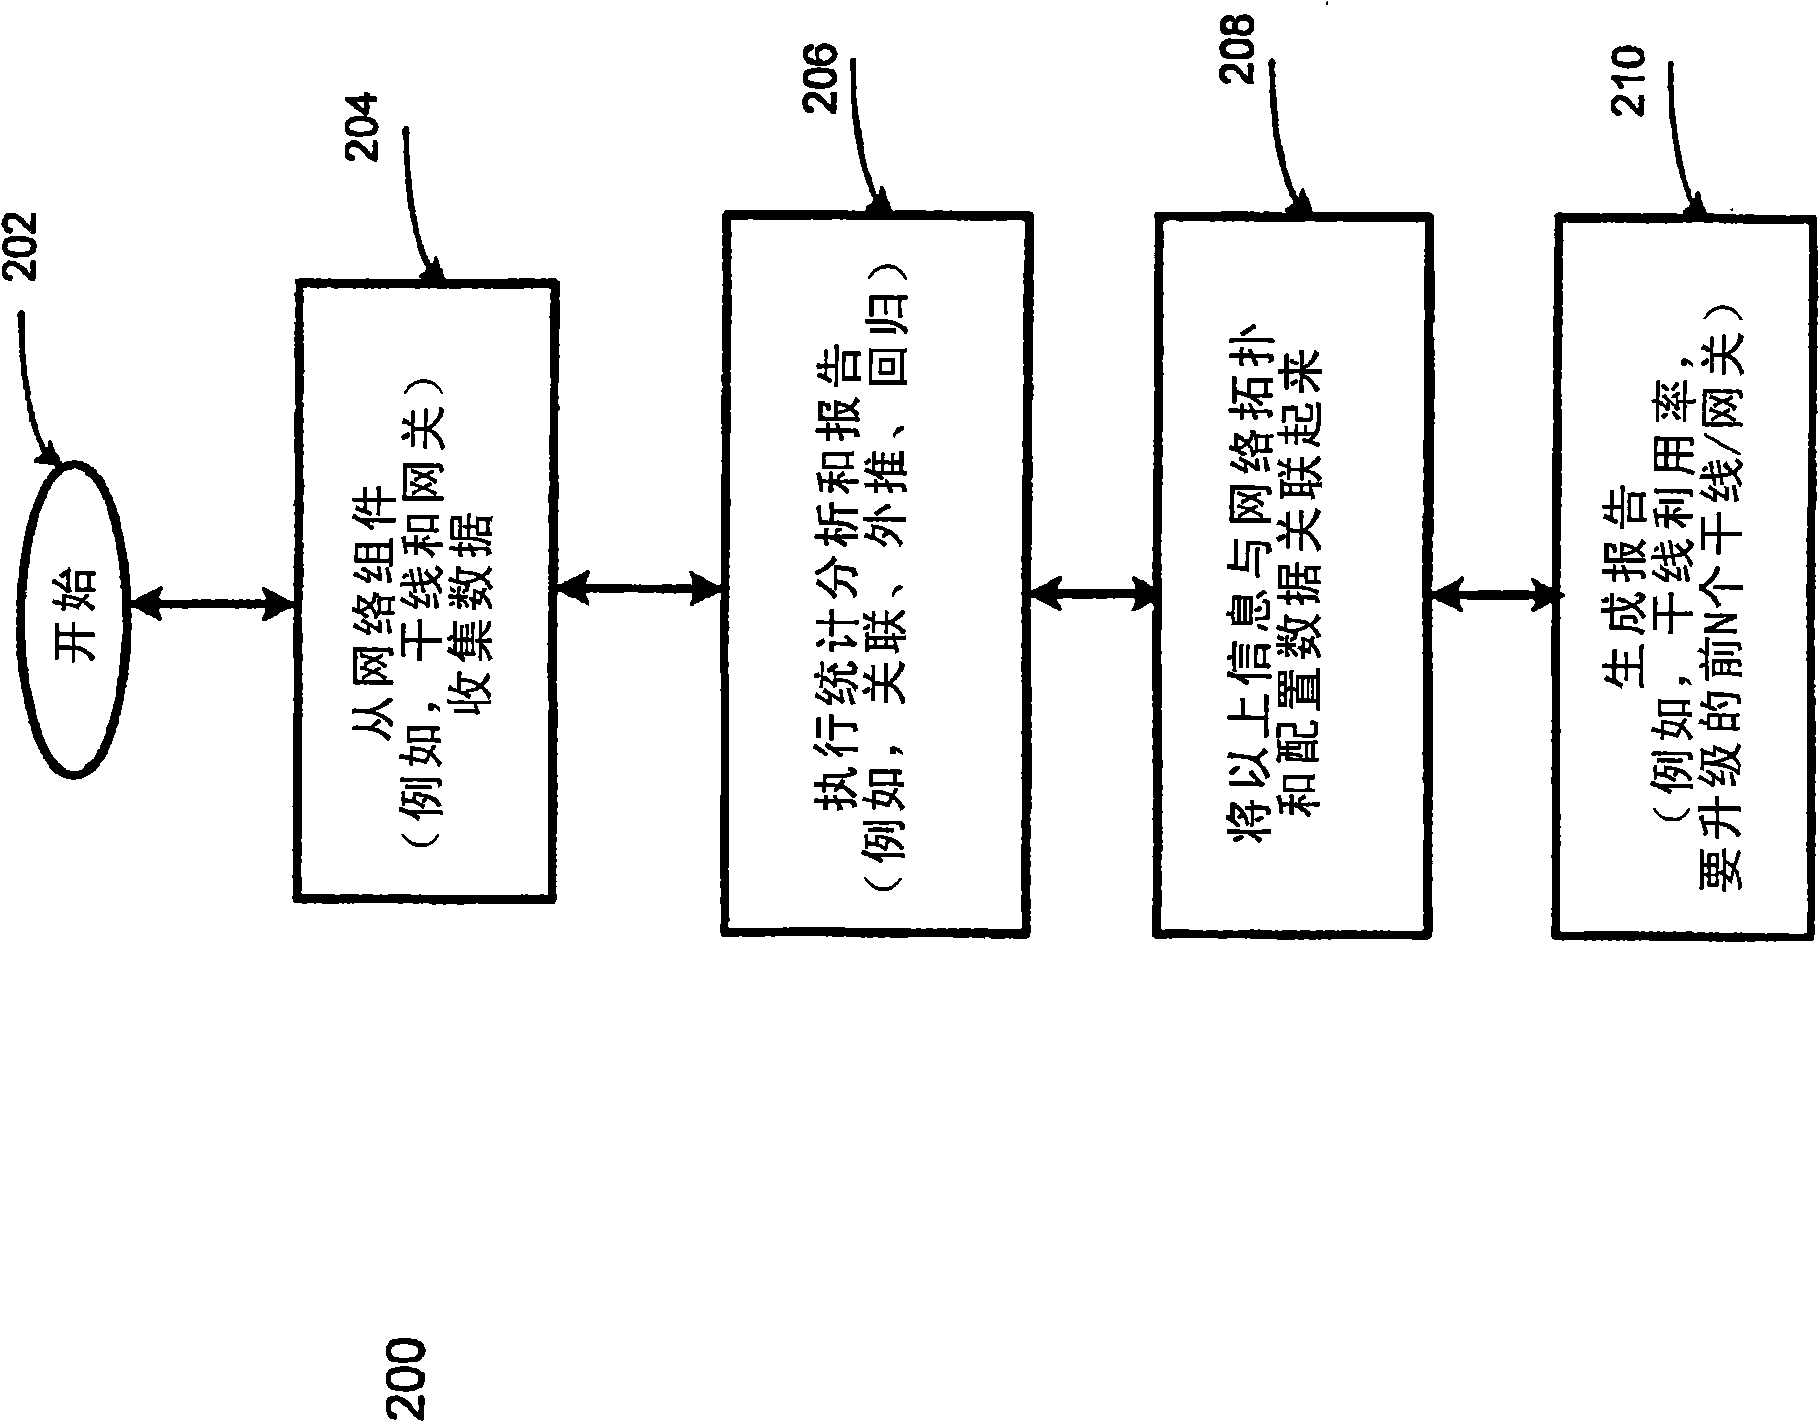 Method and system for identifying and reporting over-utilized, under-utilized, and bad quality trunks and gateways in internet protocol telephony networks